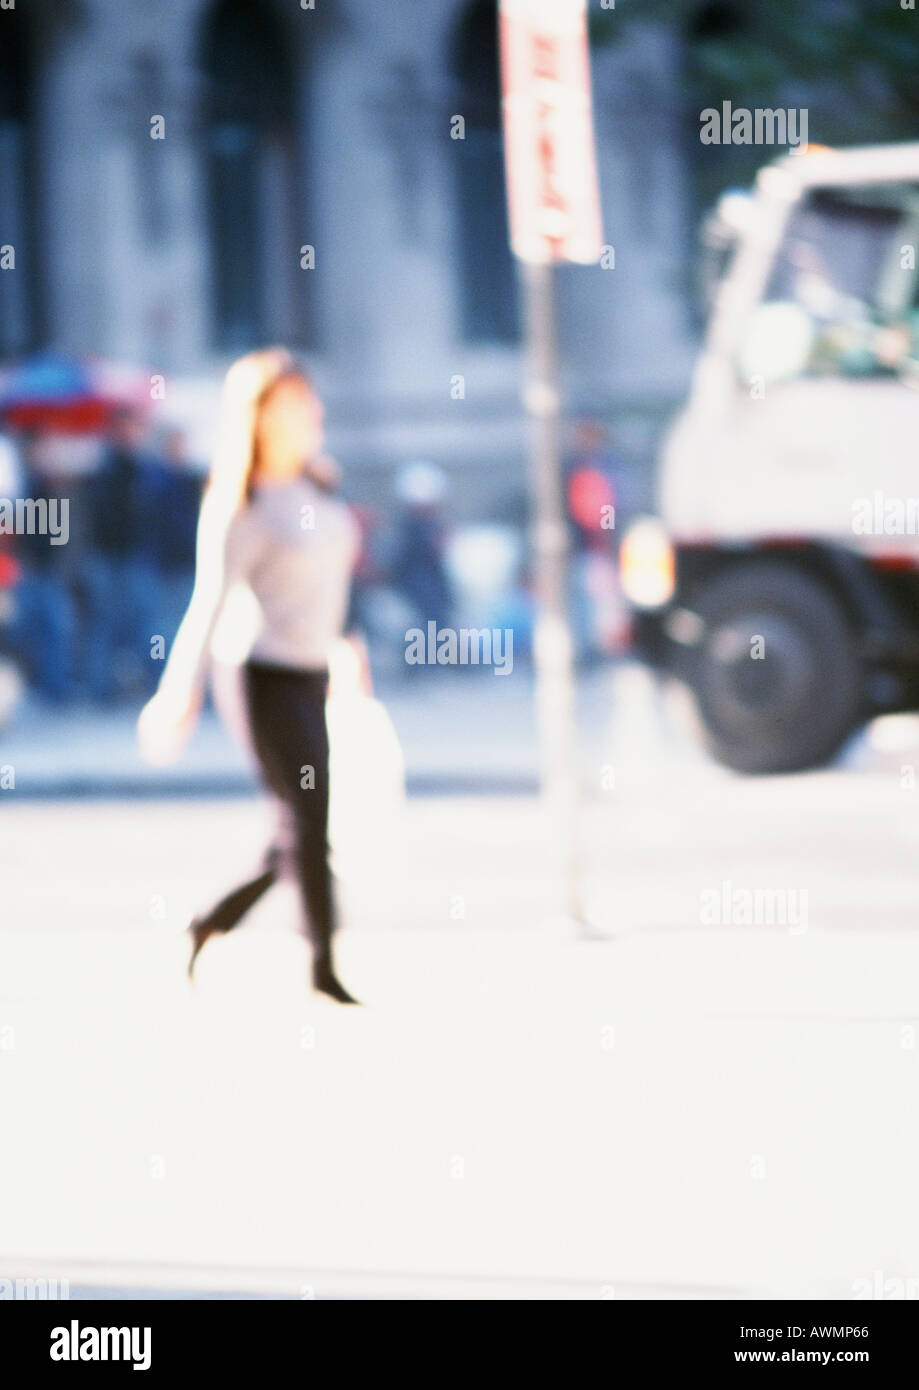 Woman holding bag, walking in street, blurred Stock Photo